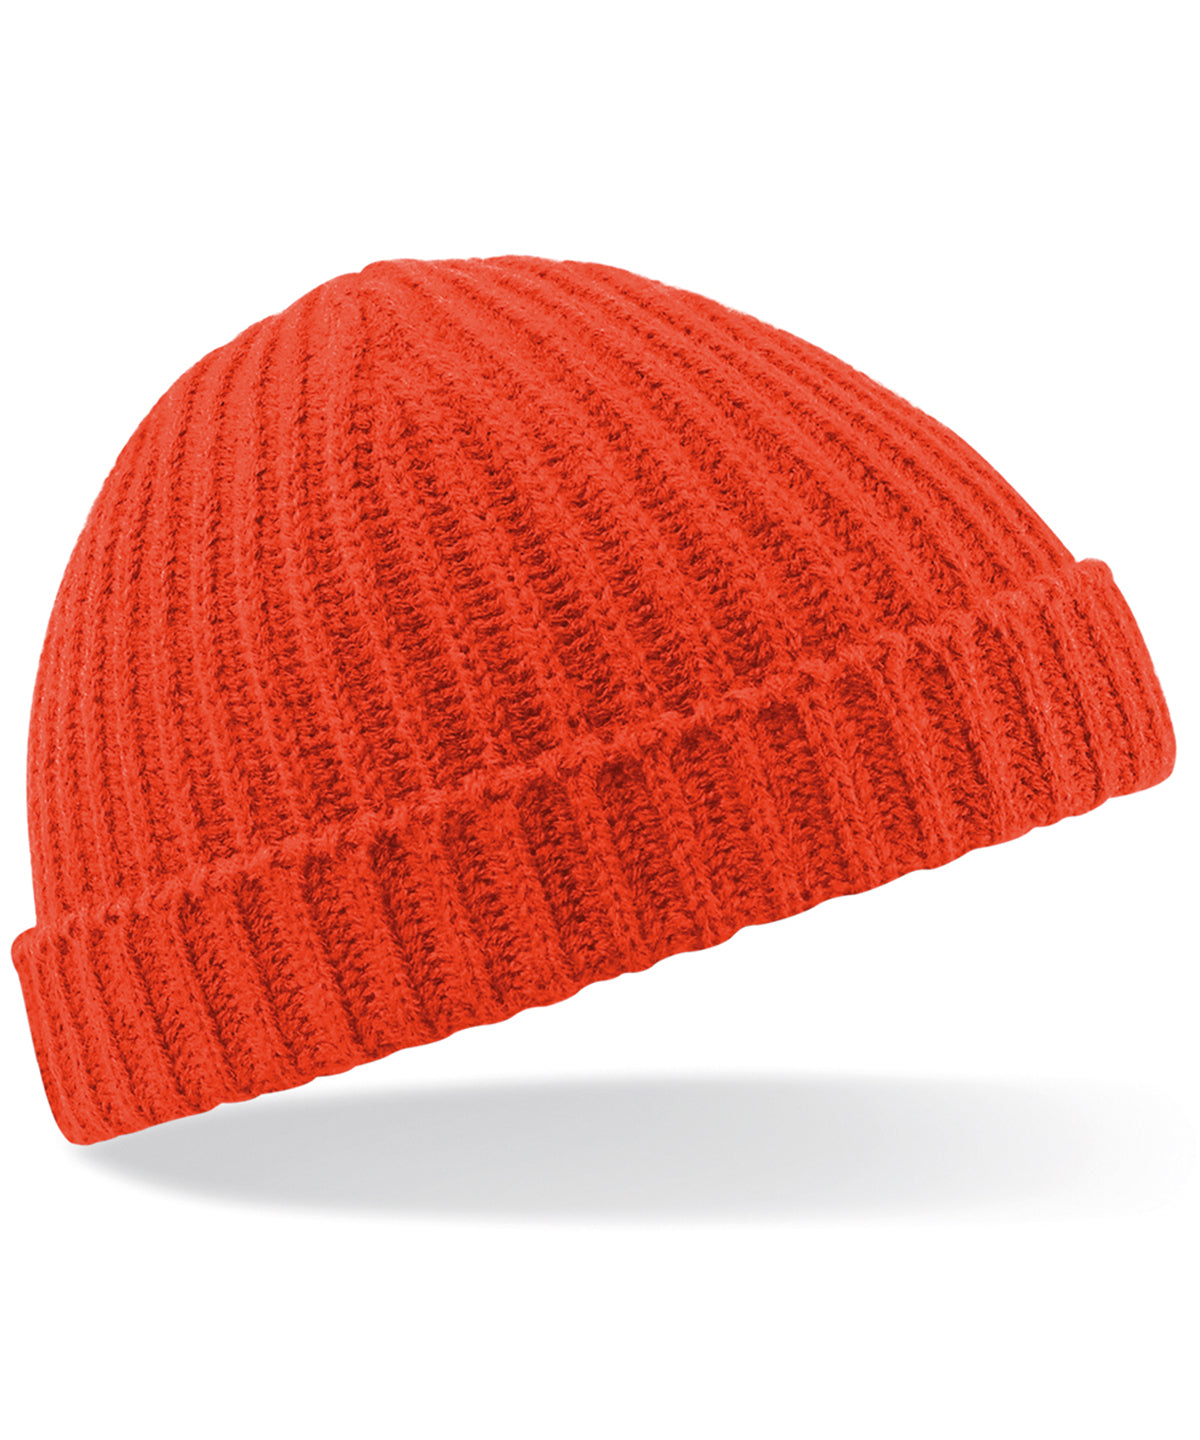 Personalised Hats - Mid Red Beechfield Trawler beanie